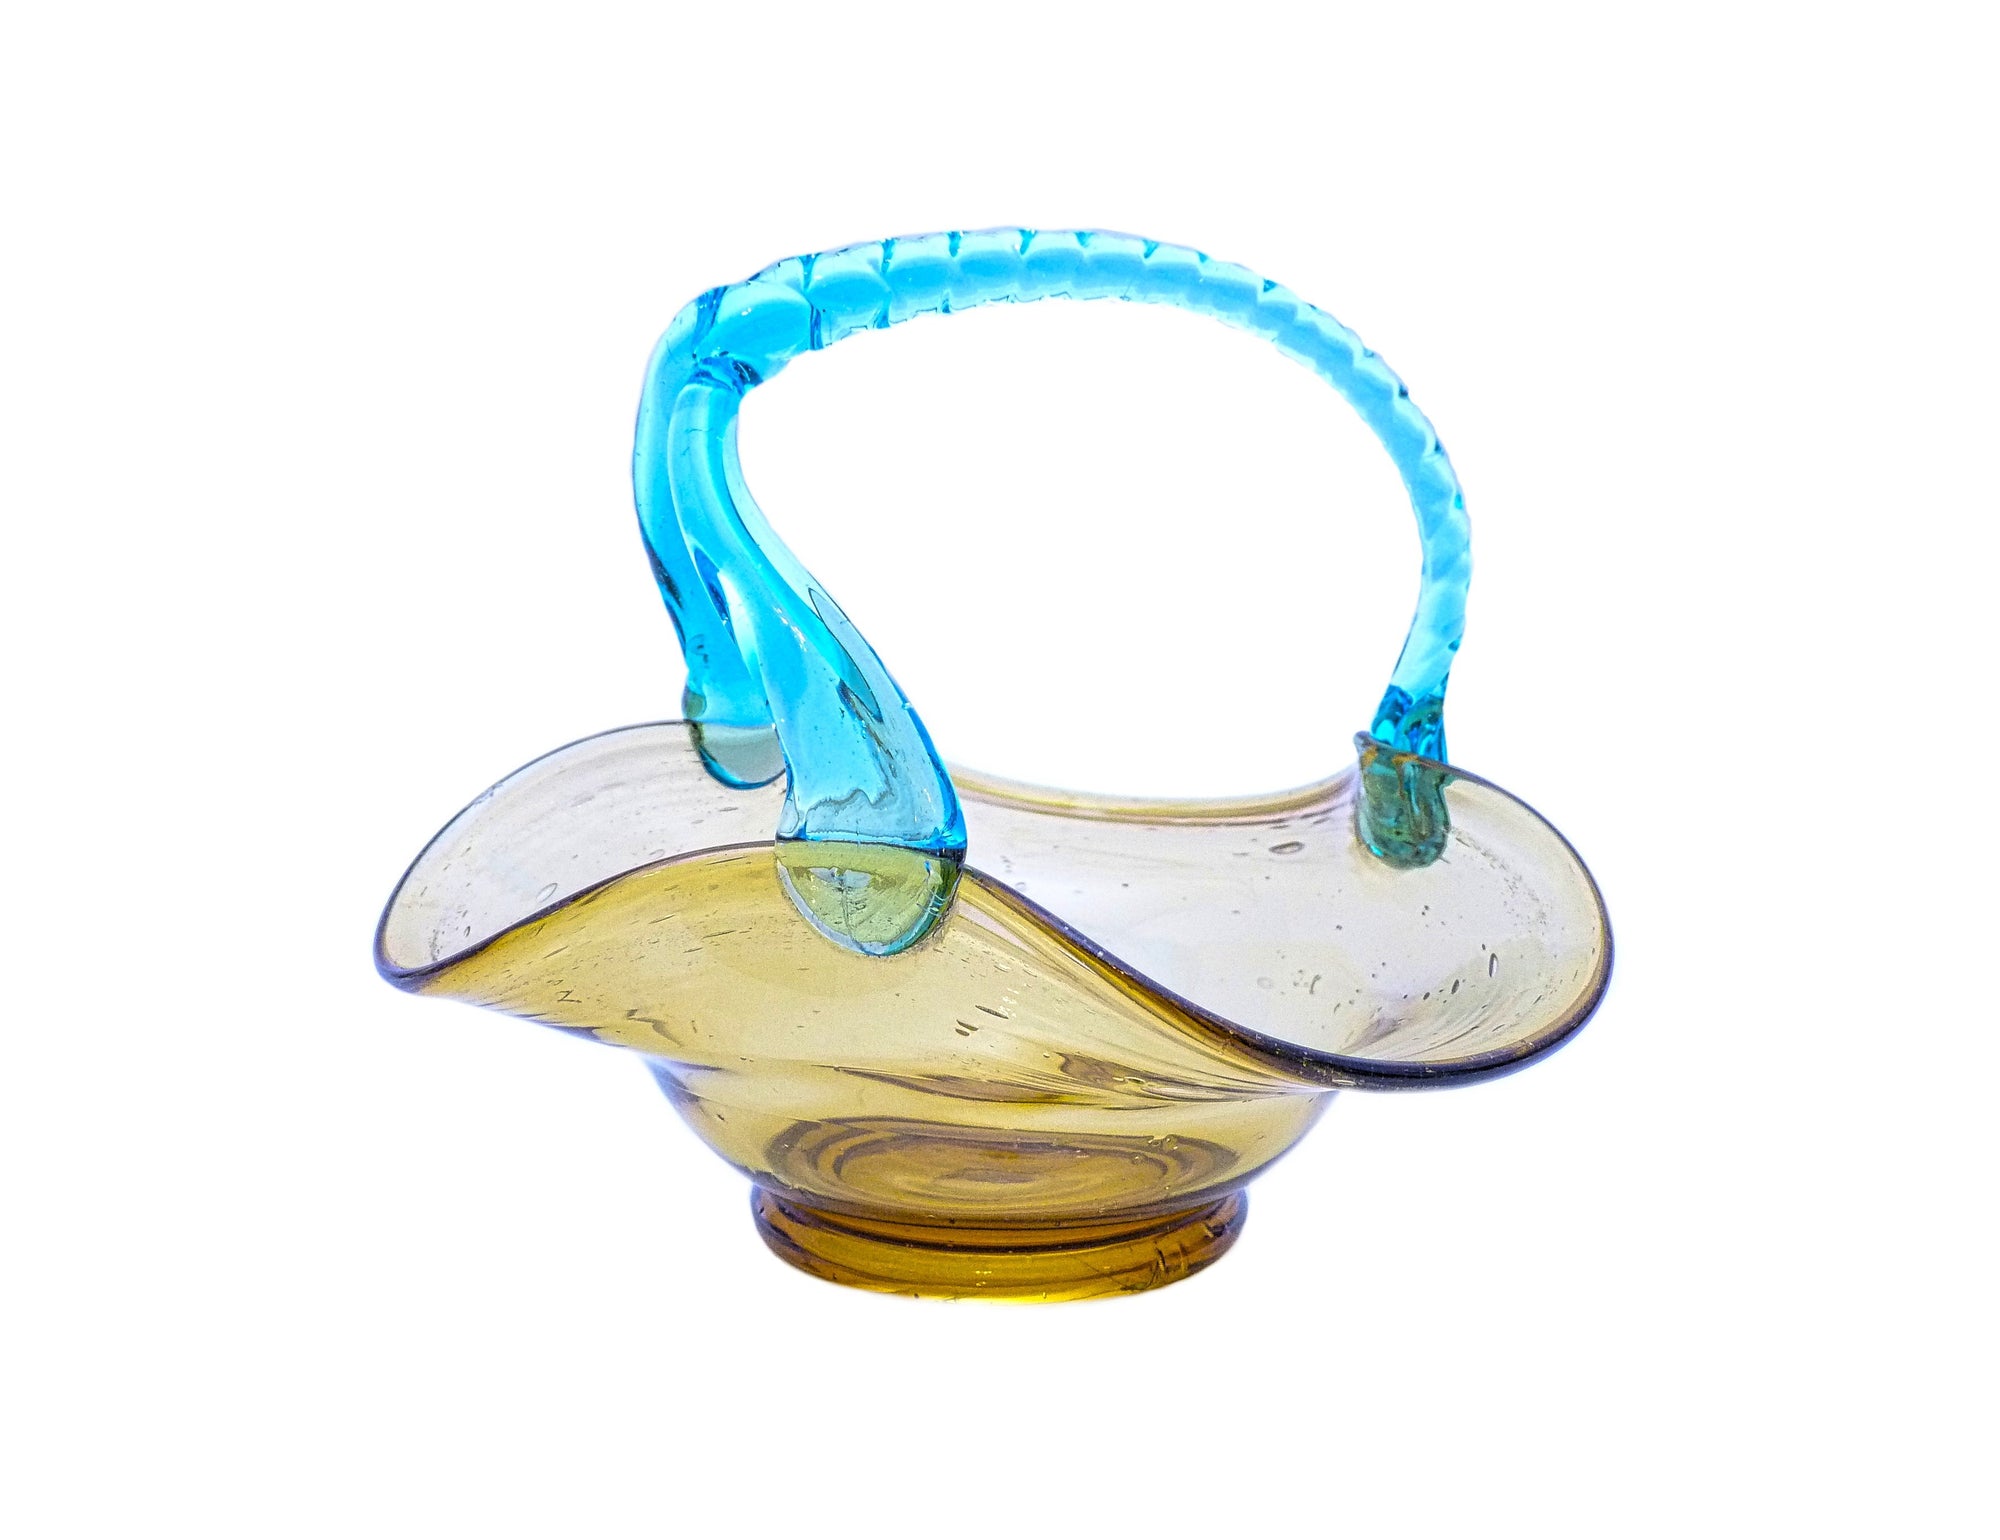 Victorian Era Amber Glass Basket with Teal Glass Handle, Delicate and Beautiful